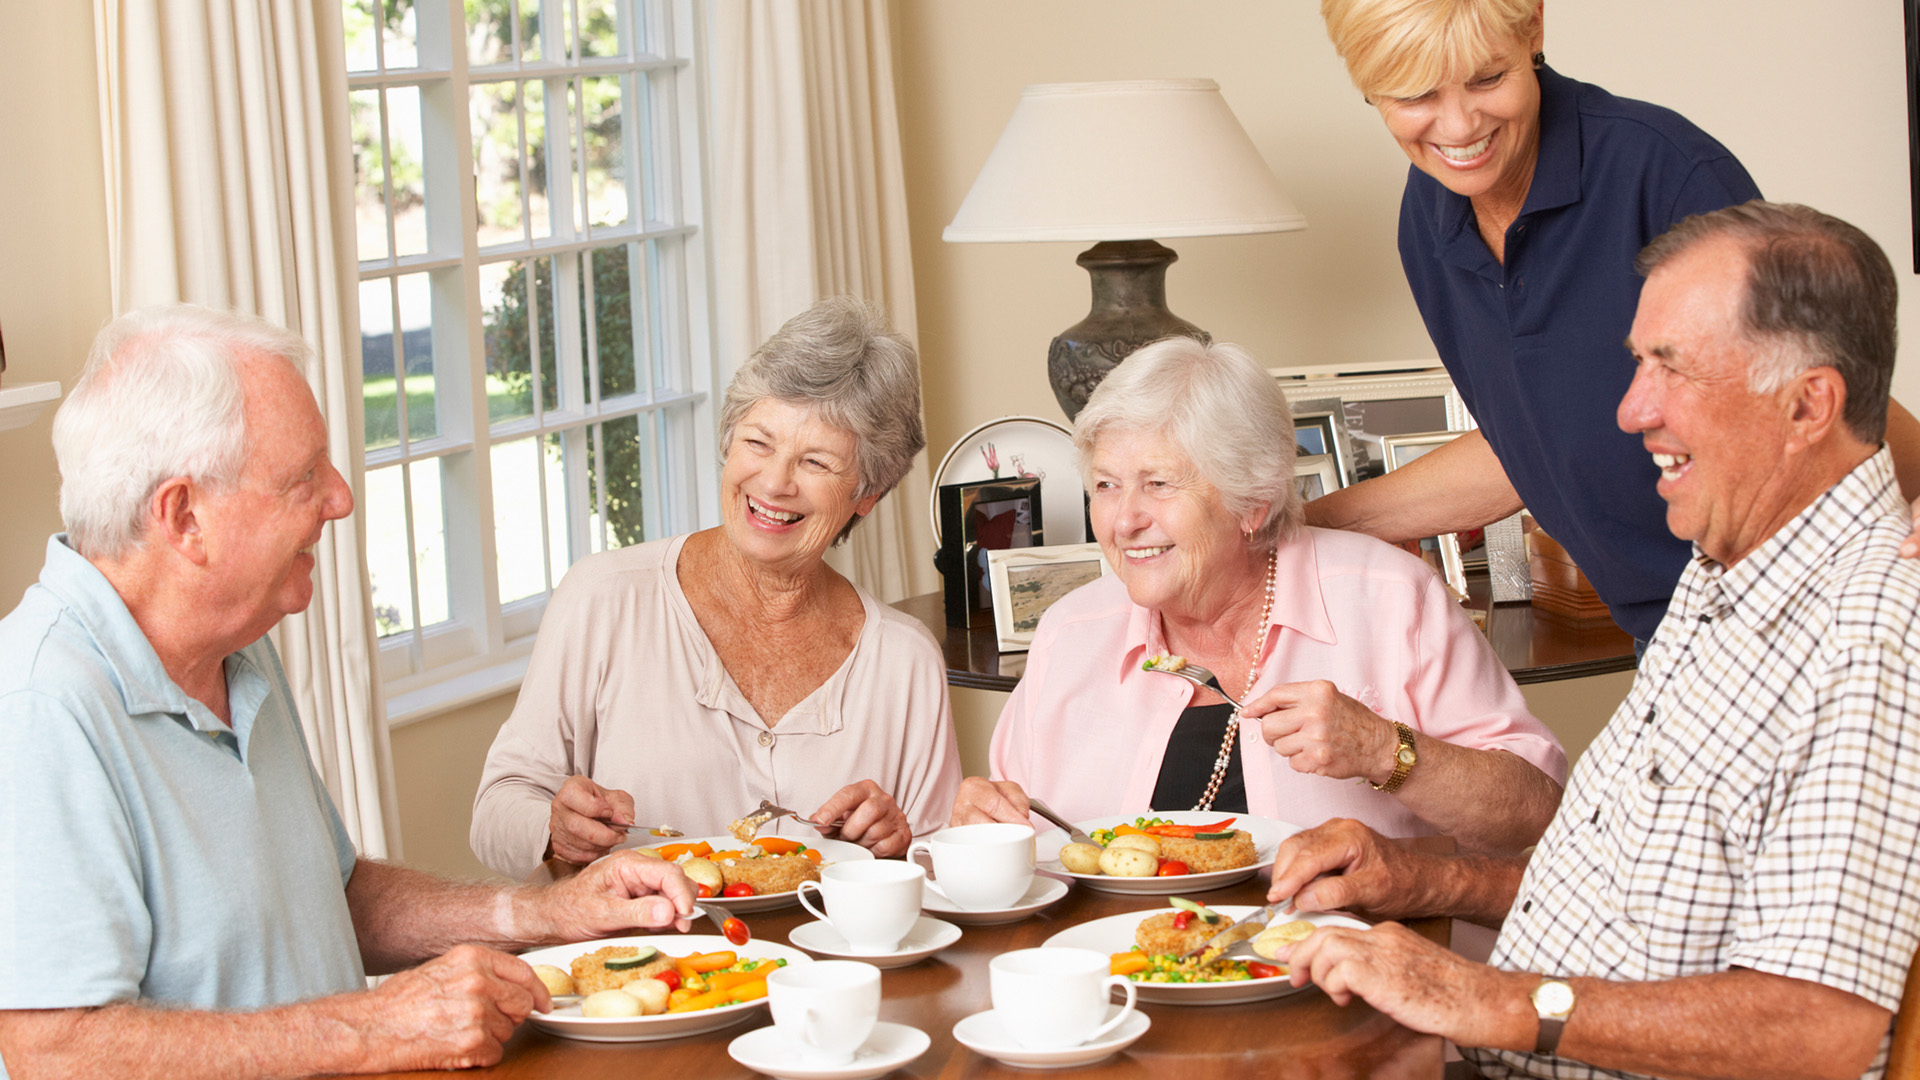 Featured image for “Dining Is an Experience Every Day at Senior Star”